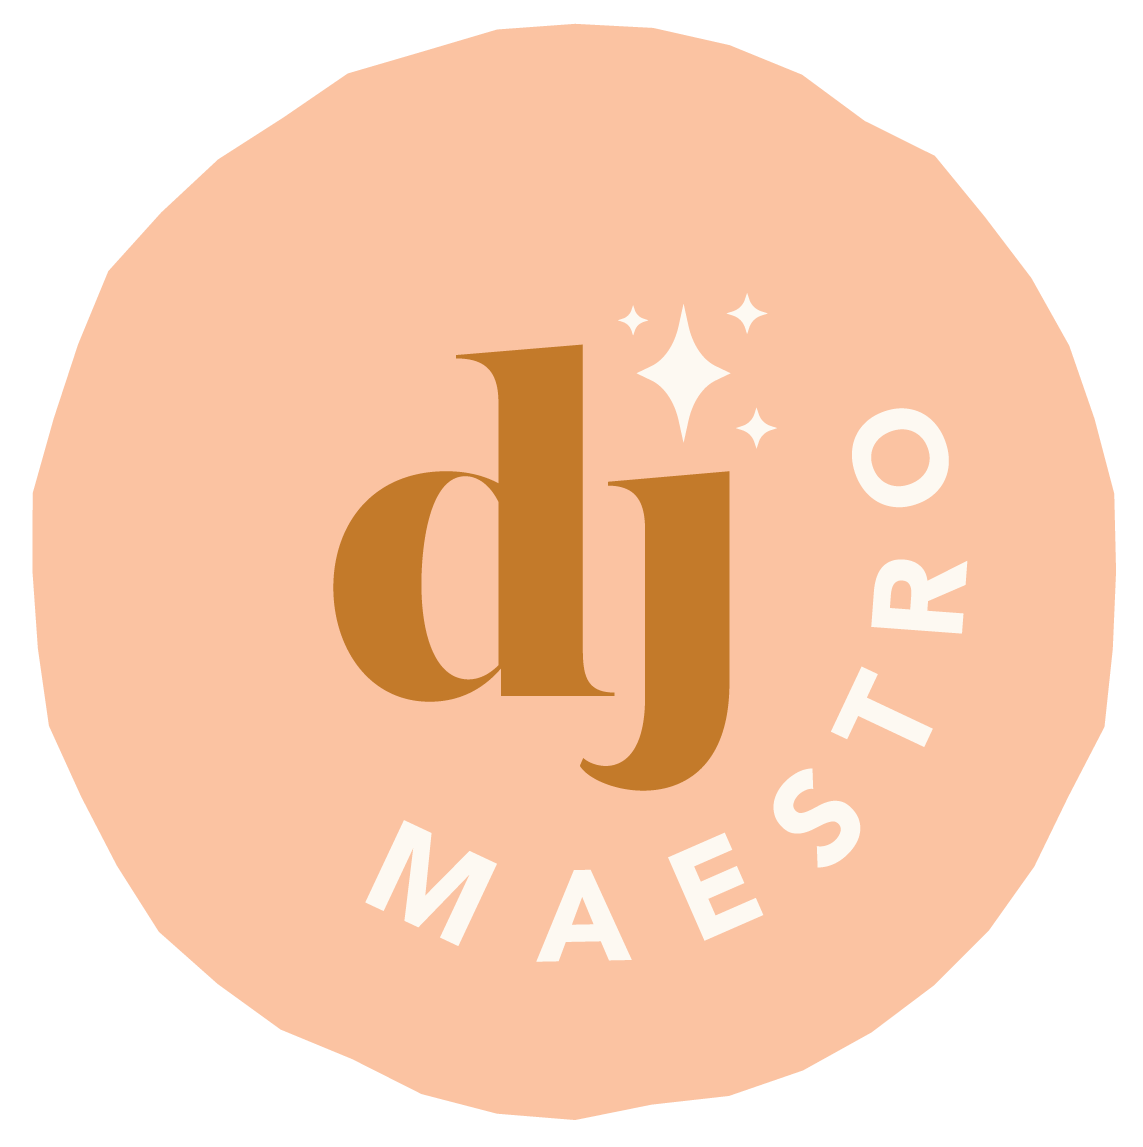 https://marcjr.org/wp-content/uploads/2021/05/DJ-MAESTRO_Icon-Blush.png